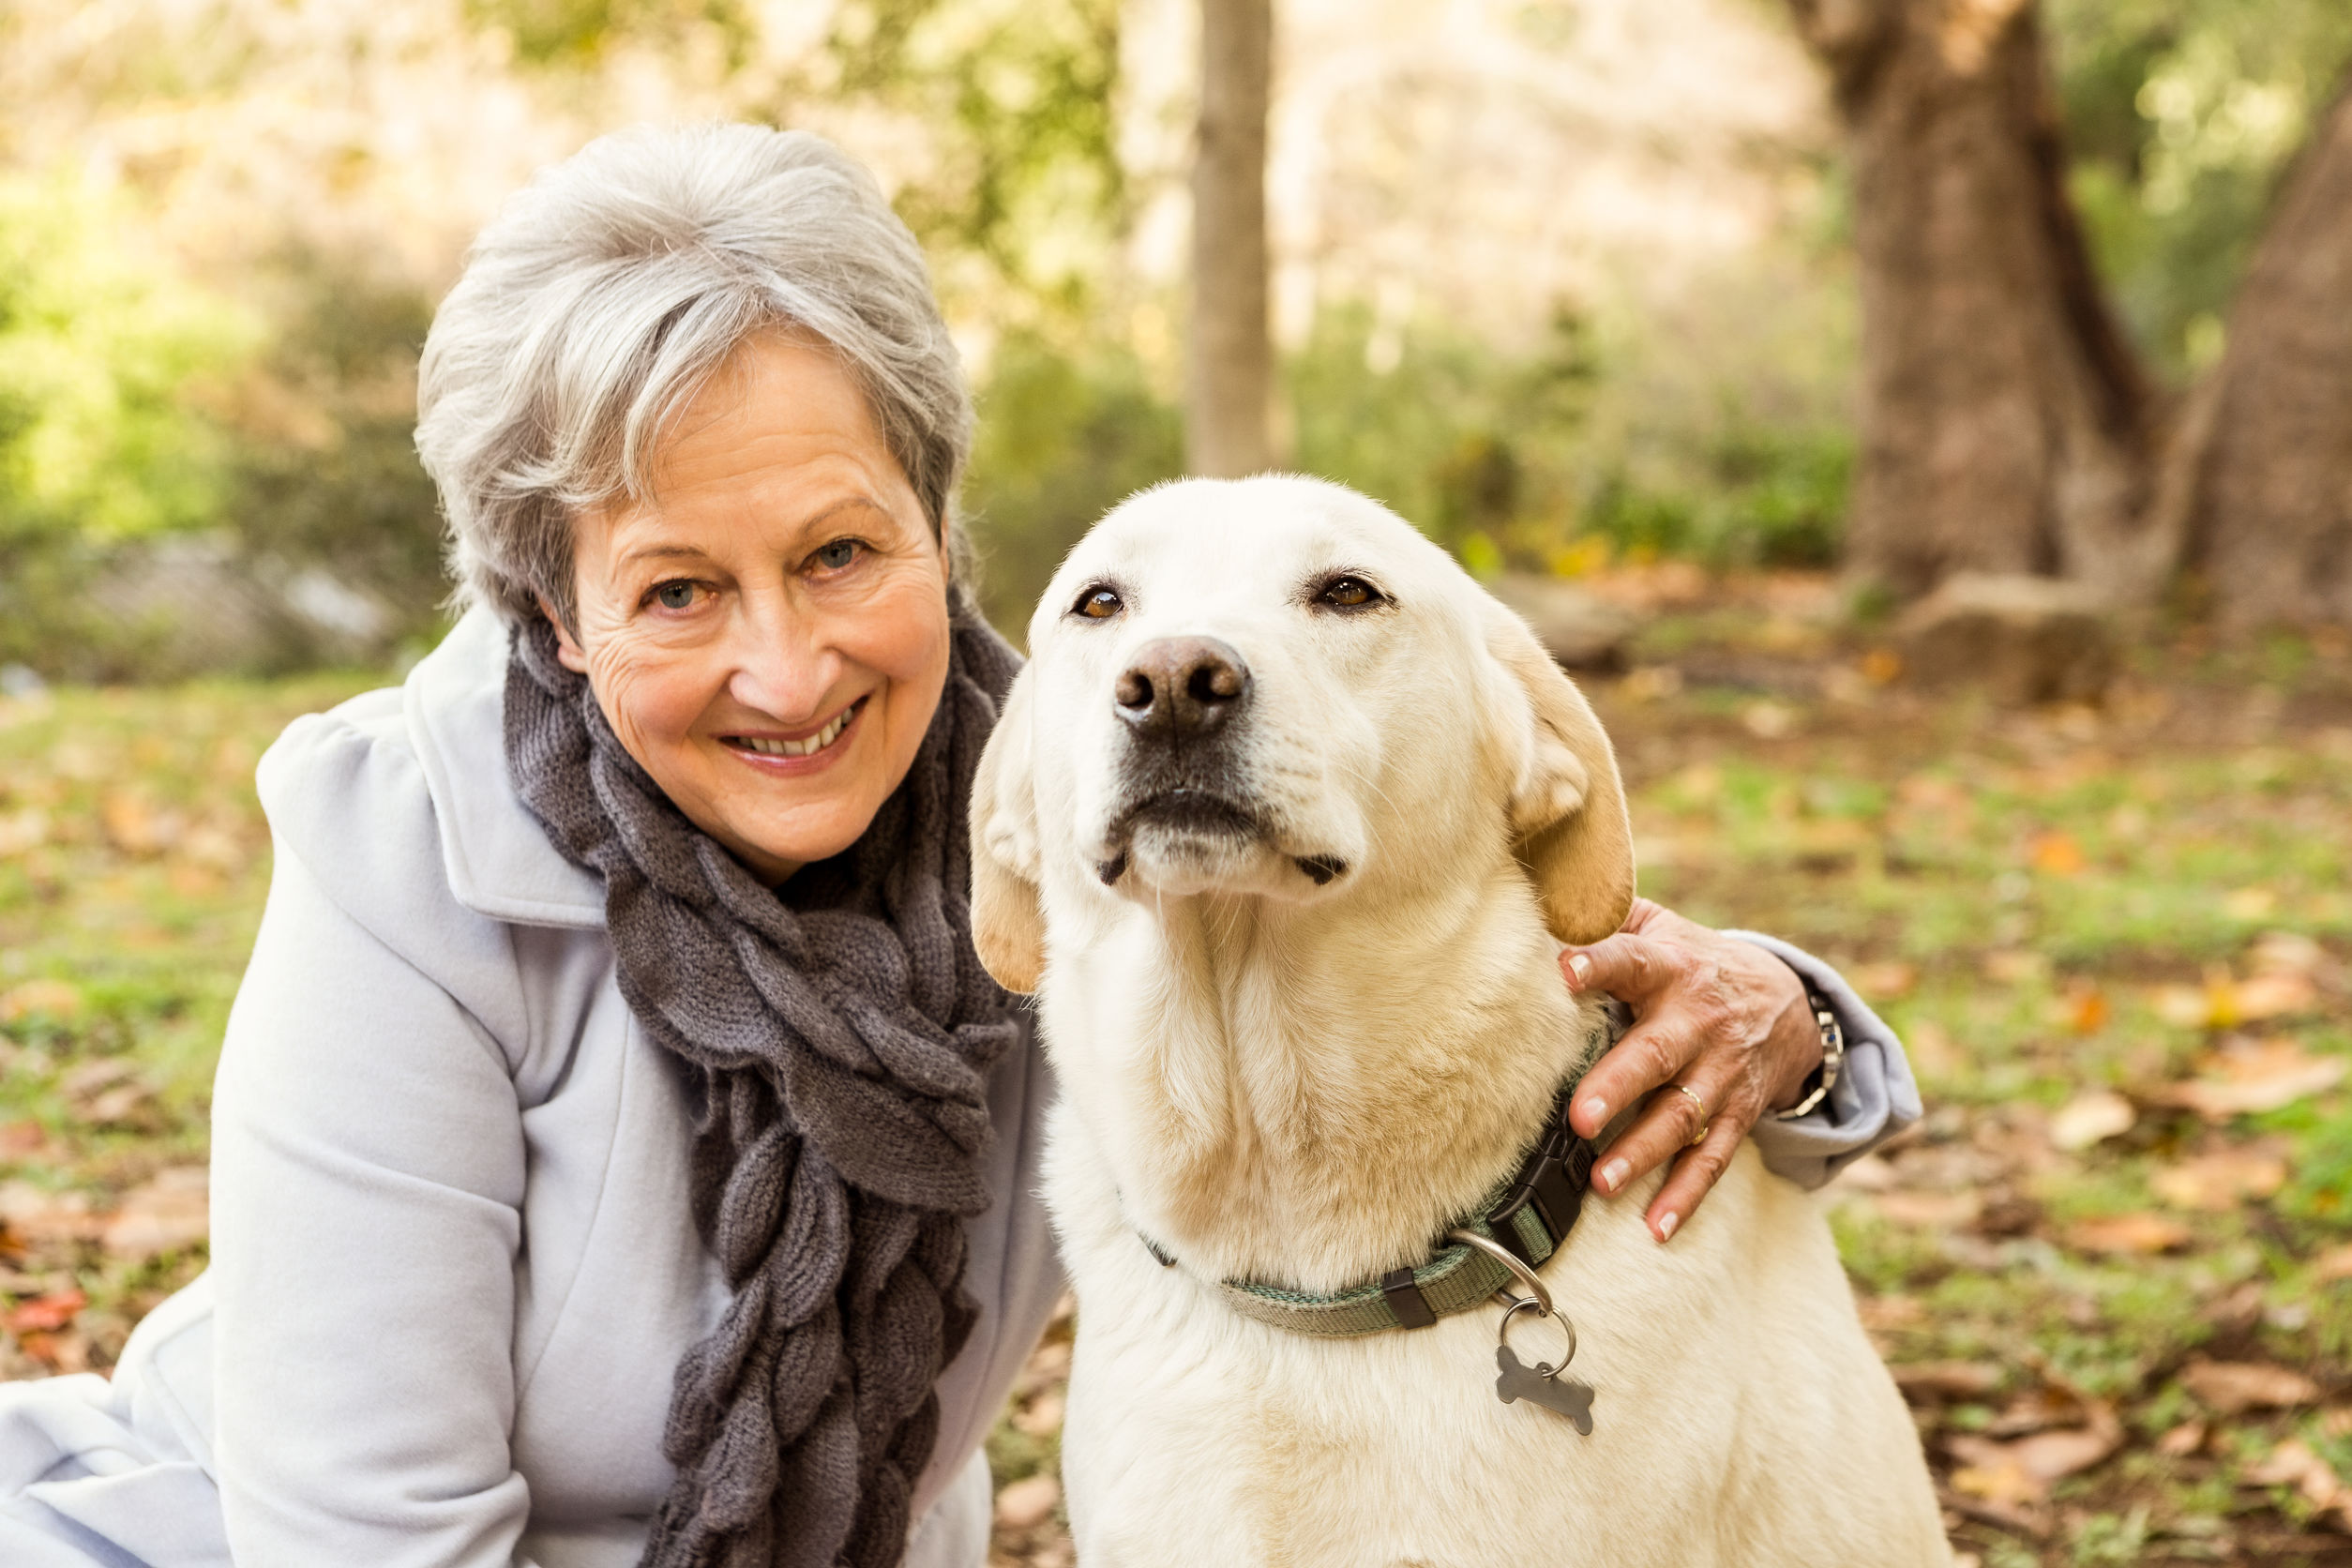 Full service care for seniors and their pets